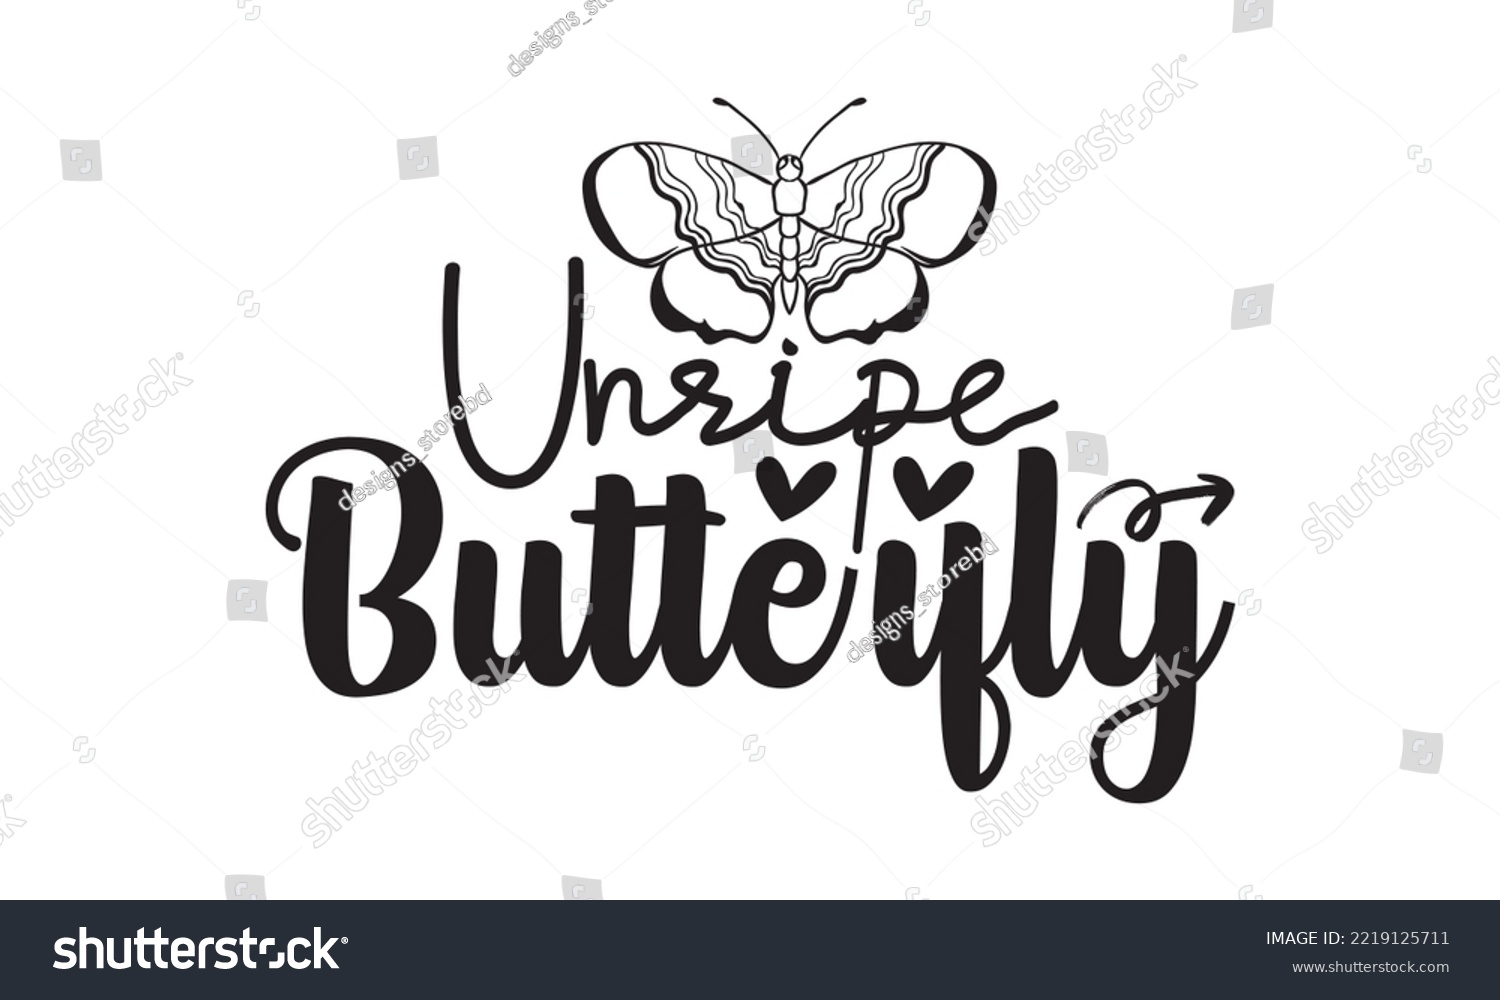 SVG of Unripe Butterfly Svg, Butterfly svg, Butterfly svg t-shirt design, butterflies and daisies positive quote flower watercolor margarita mariposa stationery, mug, t shirt, svg, eps 10 svg